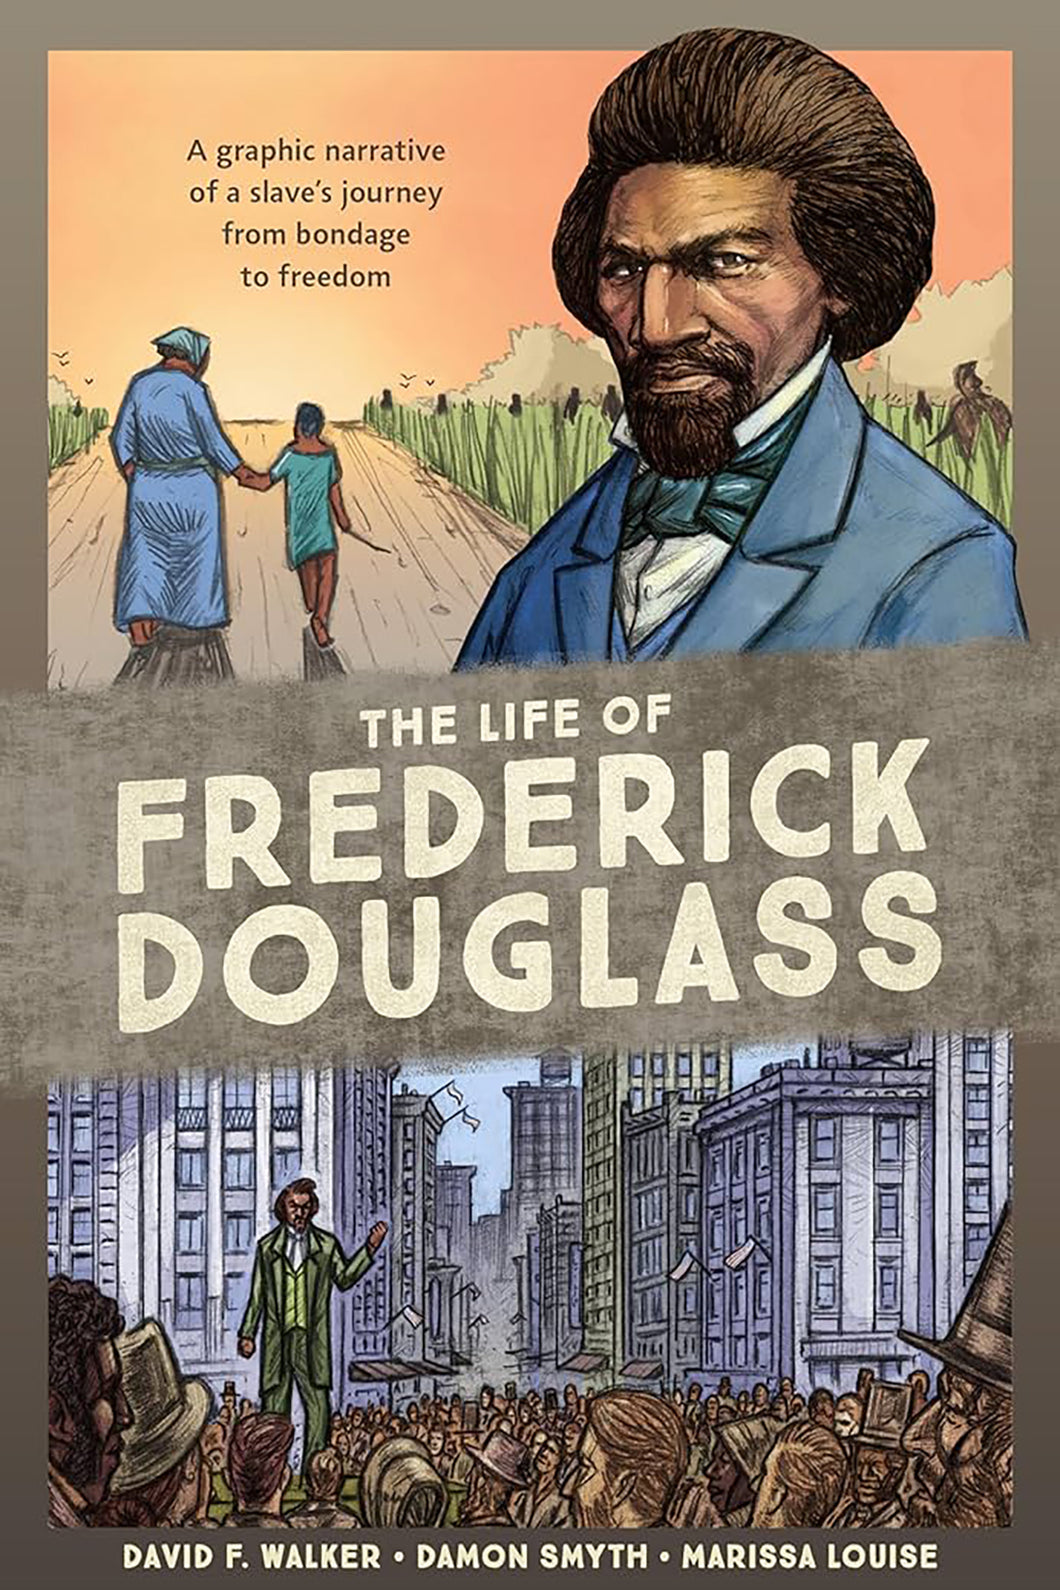 The Life of Frederick Douglass: A Graphic Narrative of a Slave's Journey from Bondage to Freedom by David F. Walker / Paperback - NEW BOOK